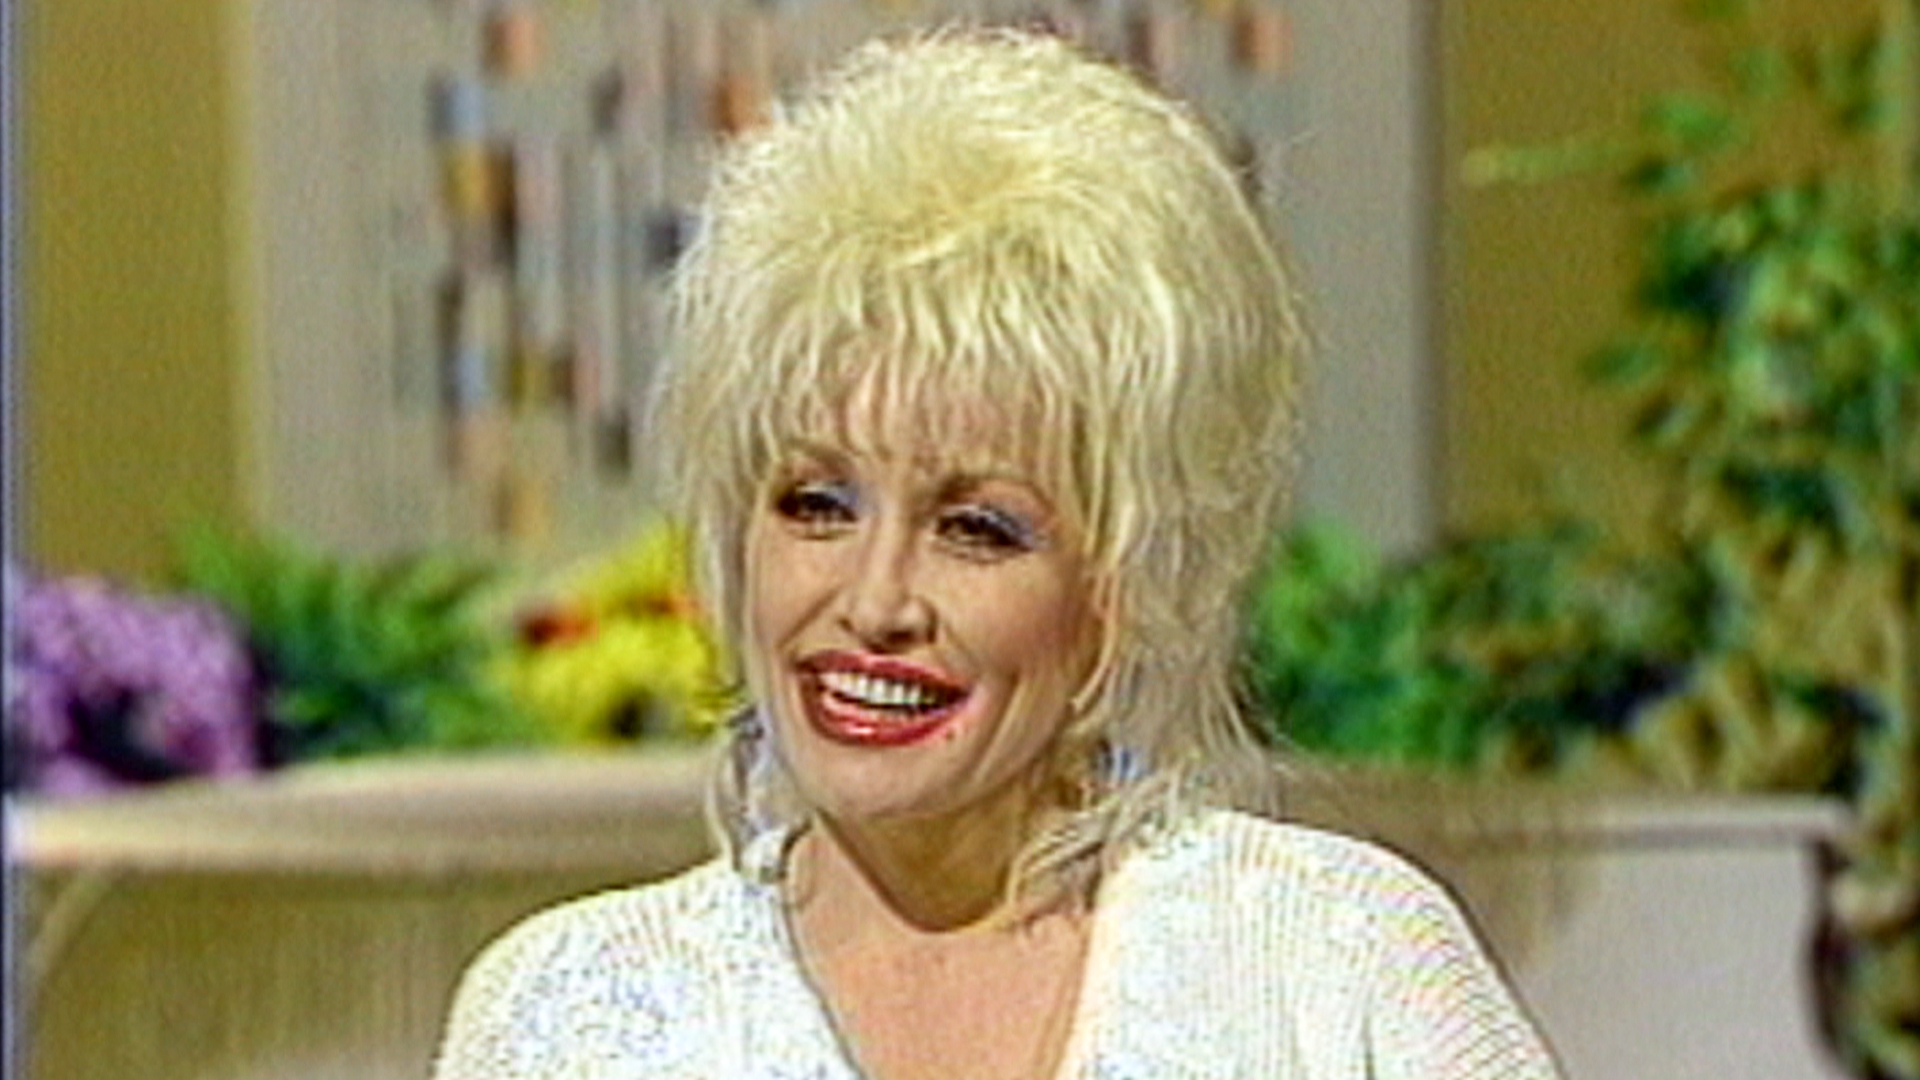 Flashback: See Dolly Parton's awesome attitude toward aging - TODAY.com1920 x 1080